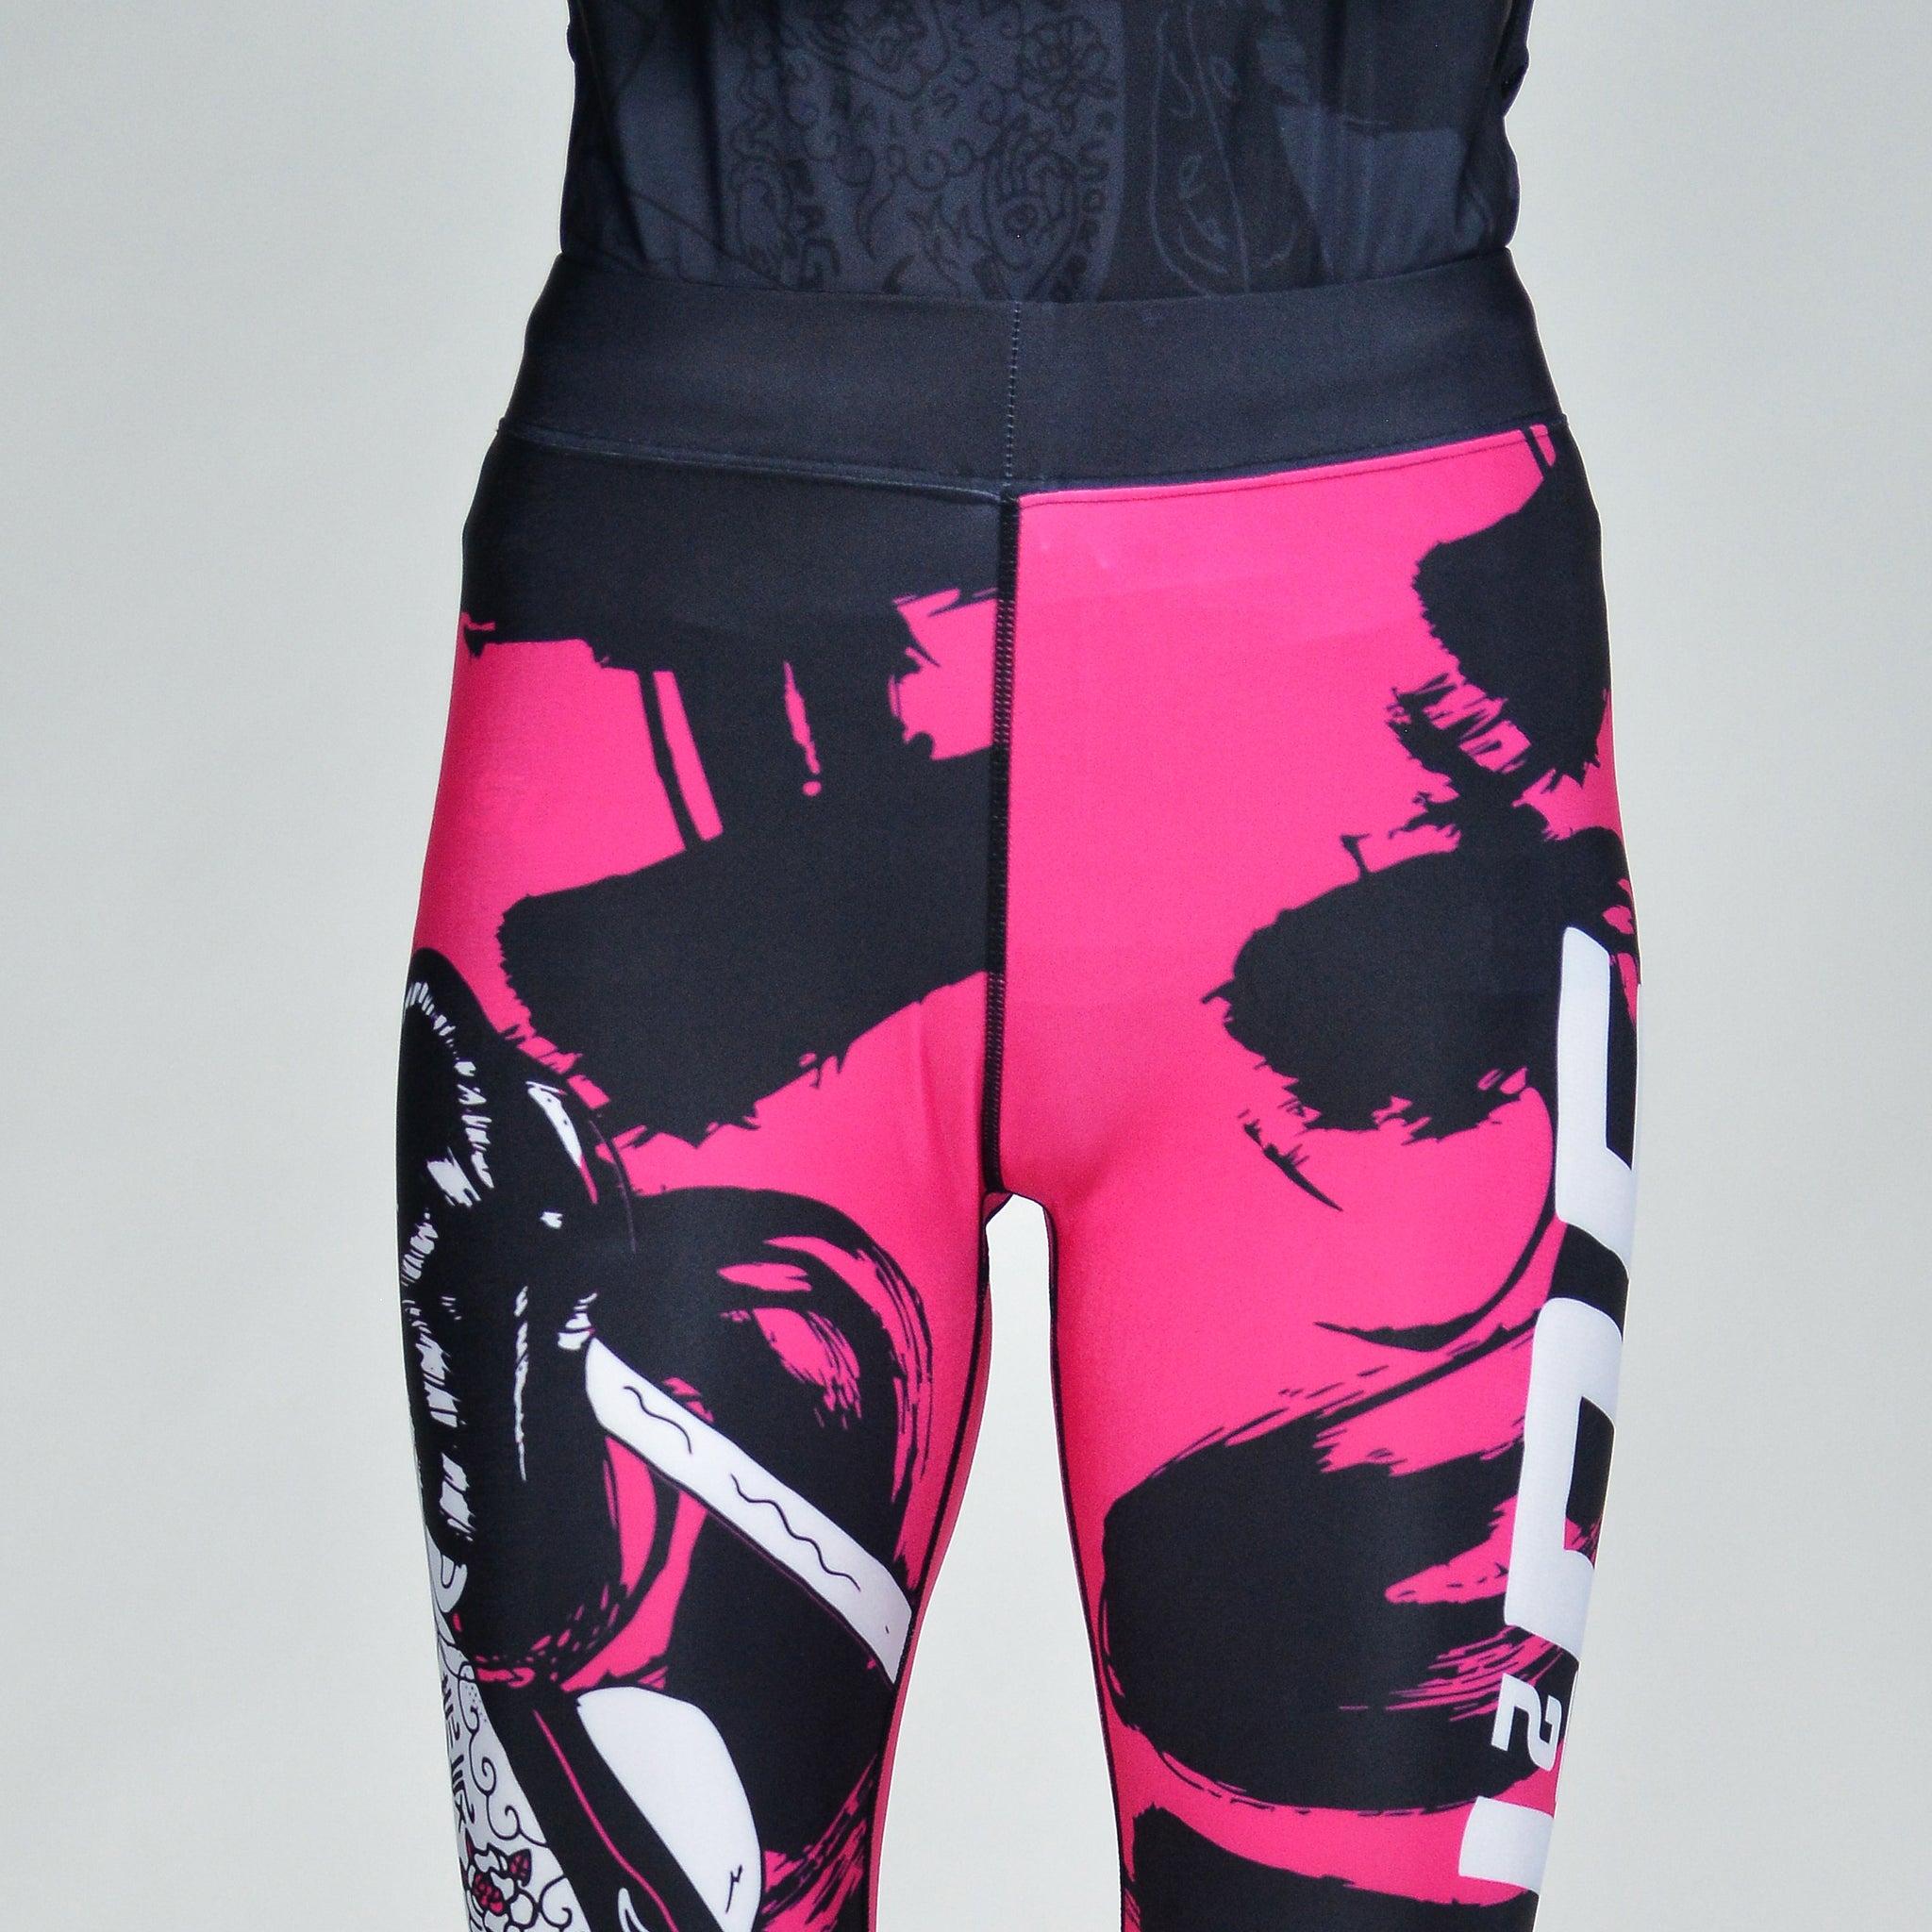 Onna Neon Spats for Women